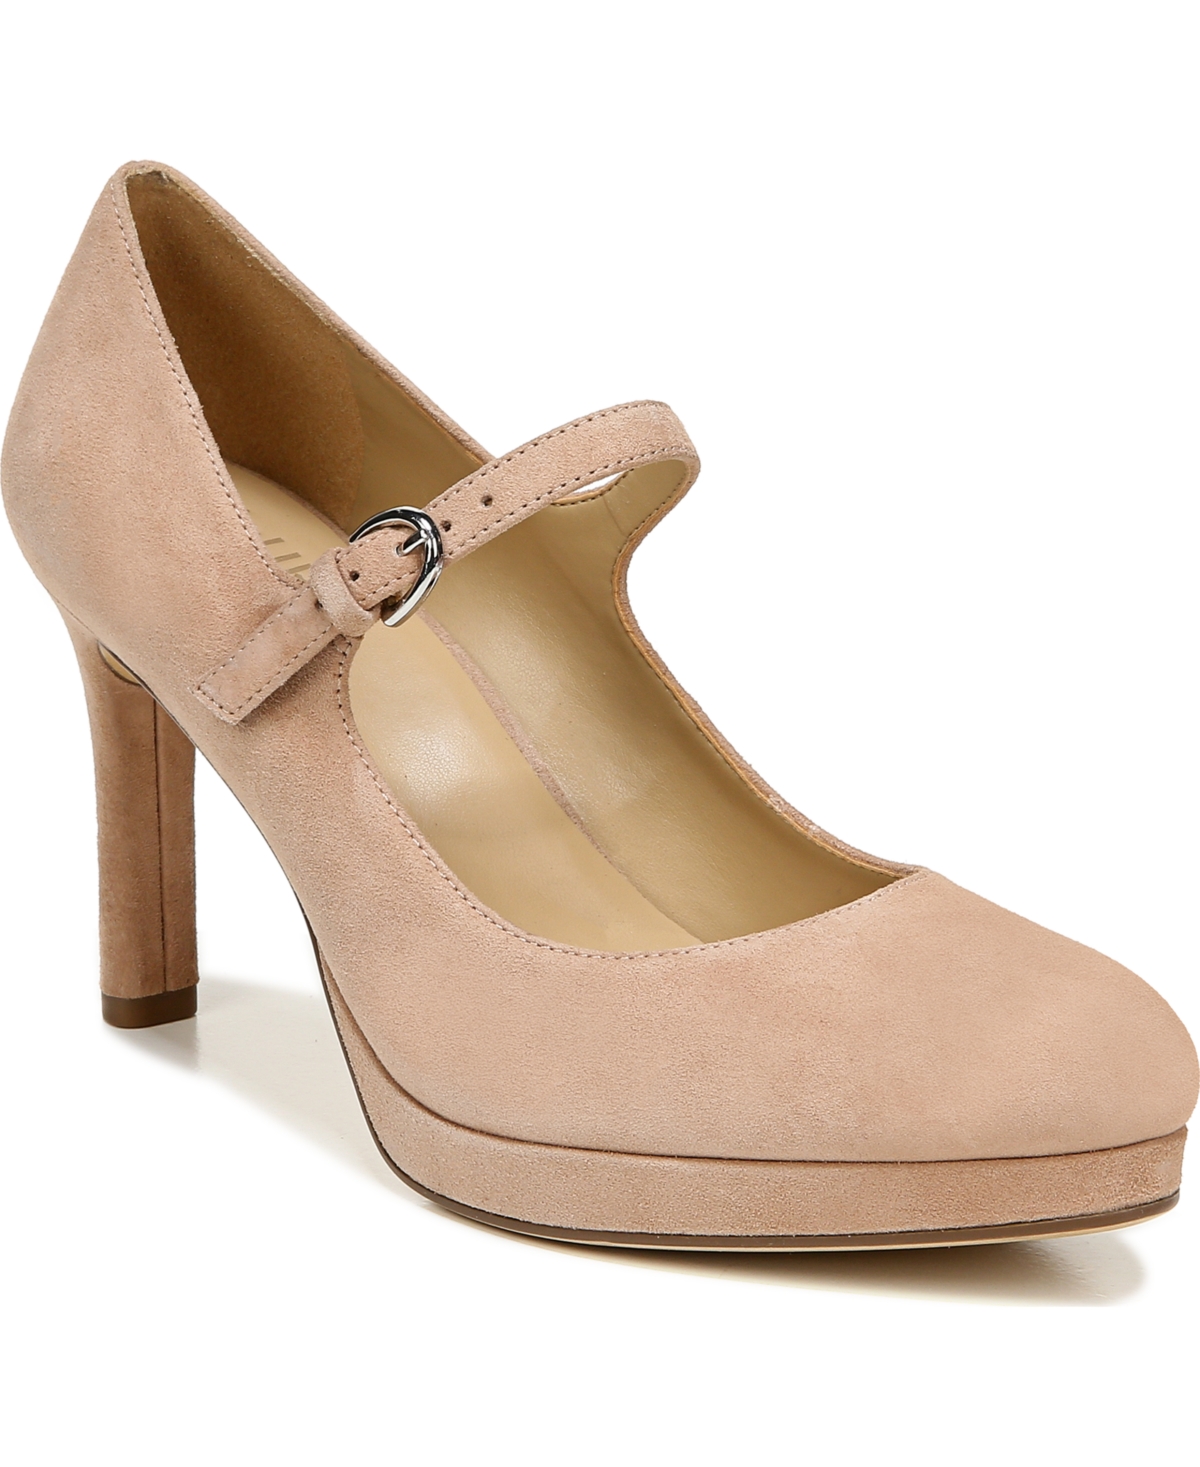 Talissa Mary Jane Pumps - Barely Nude Suede